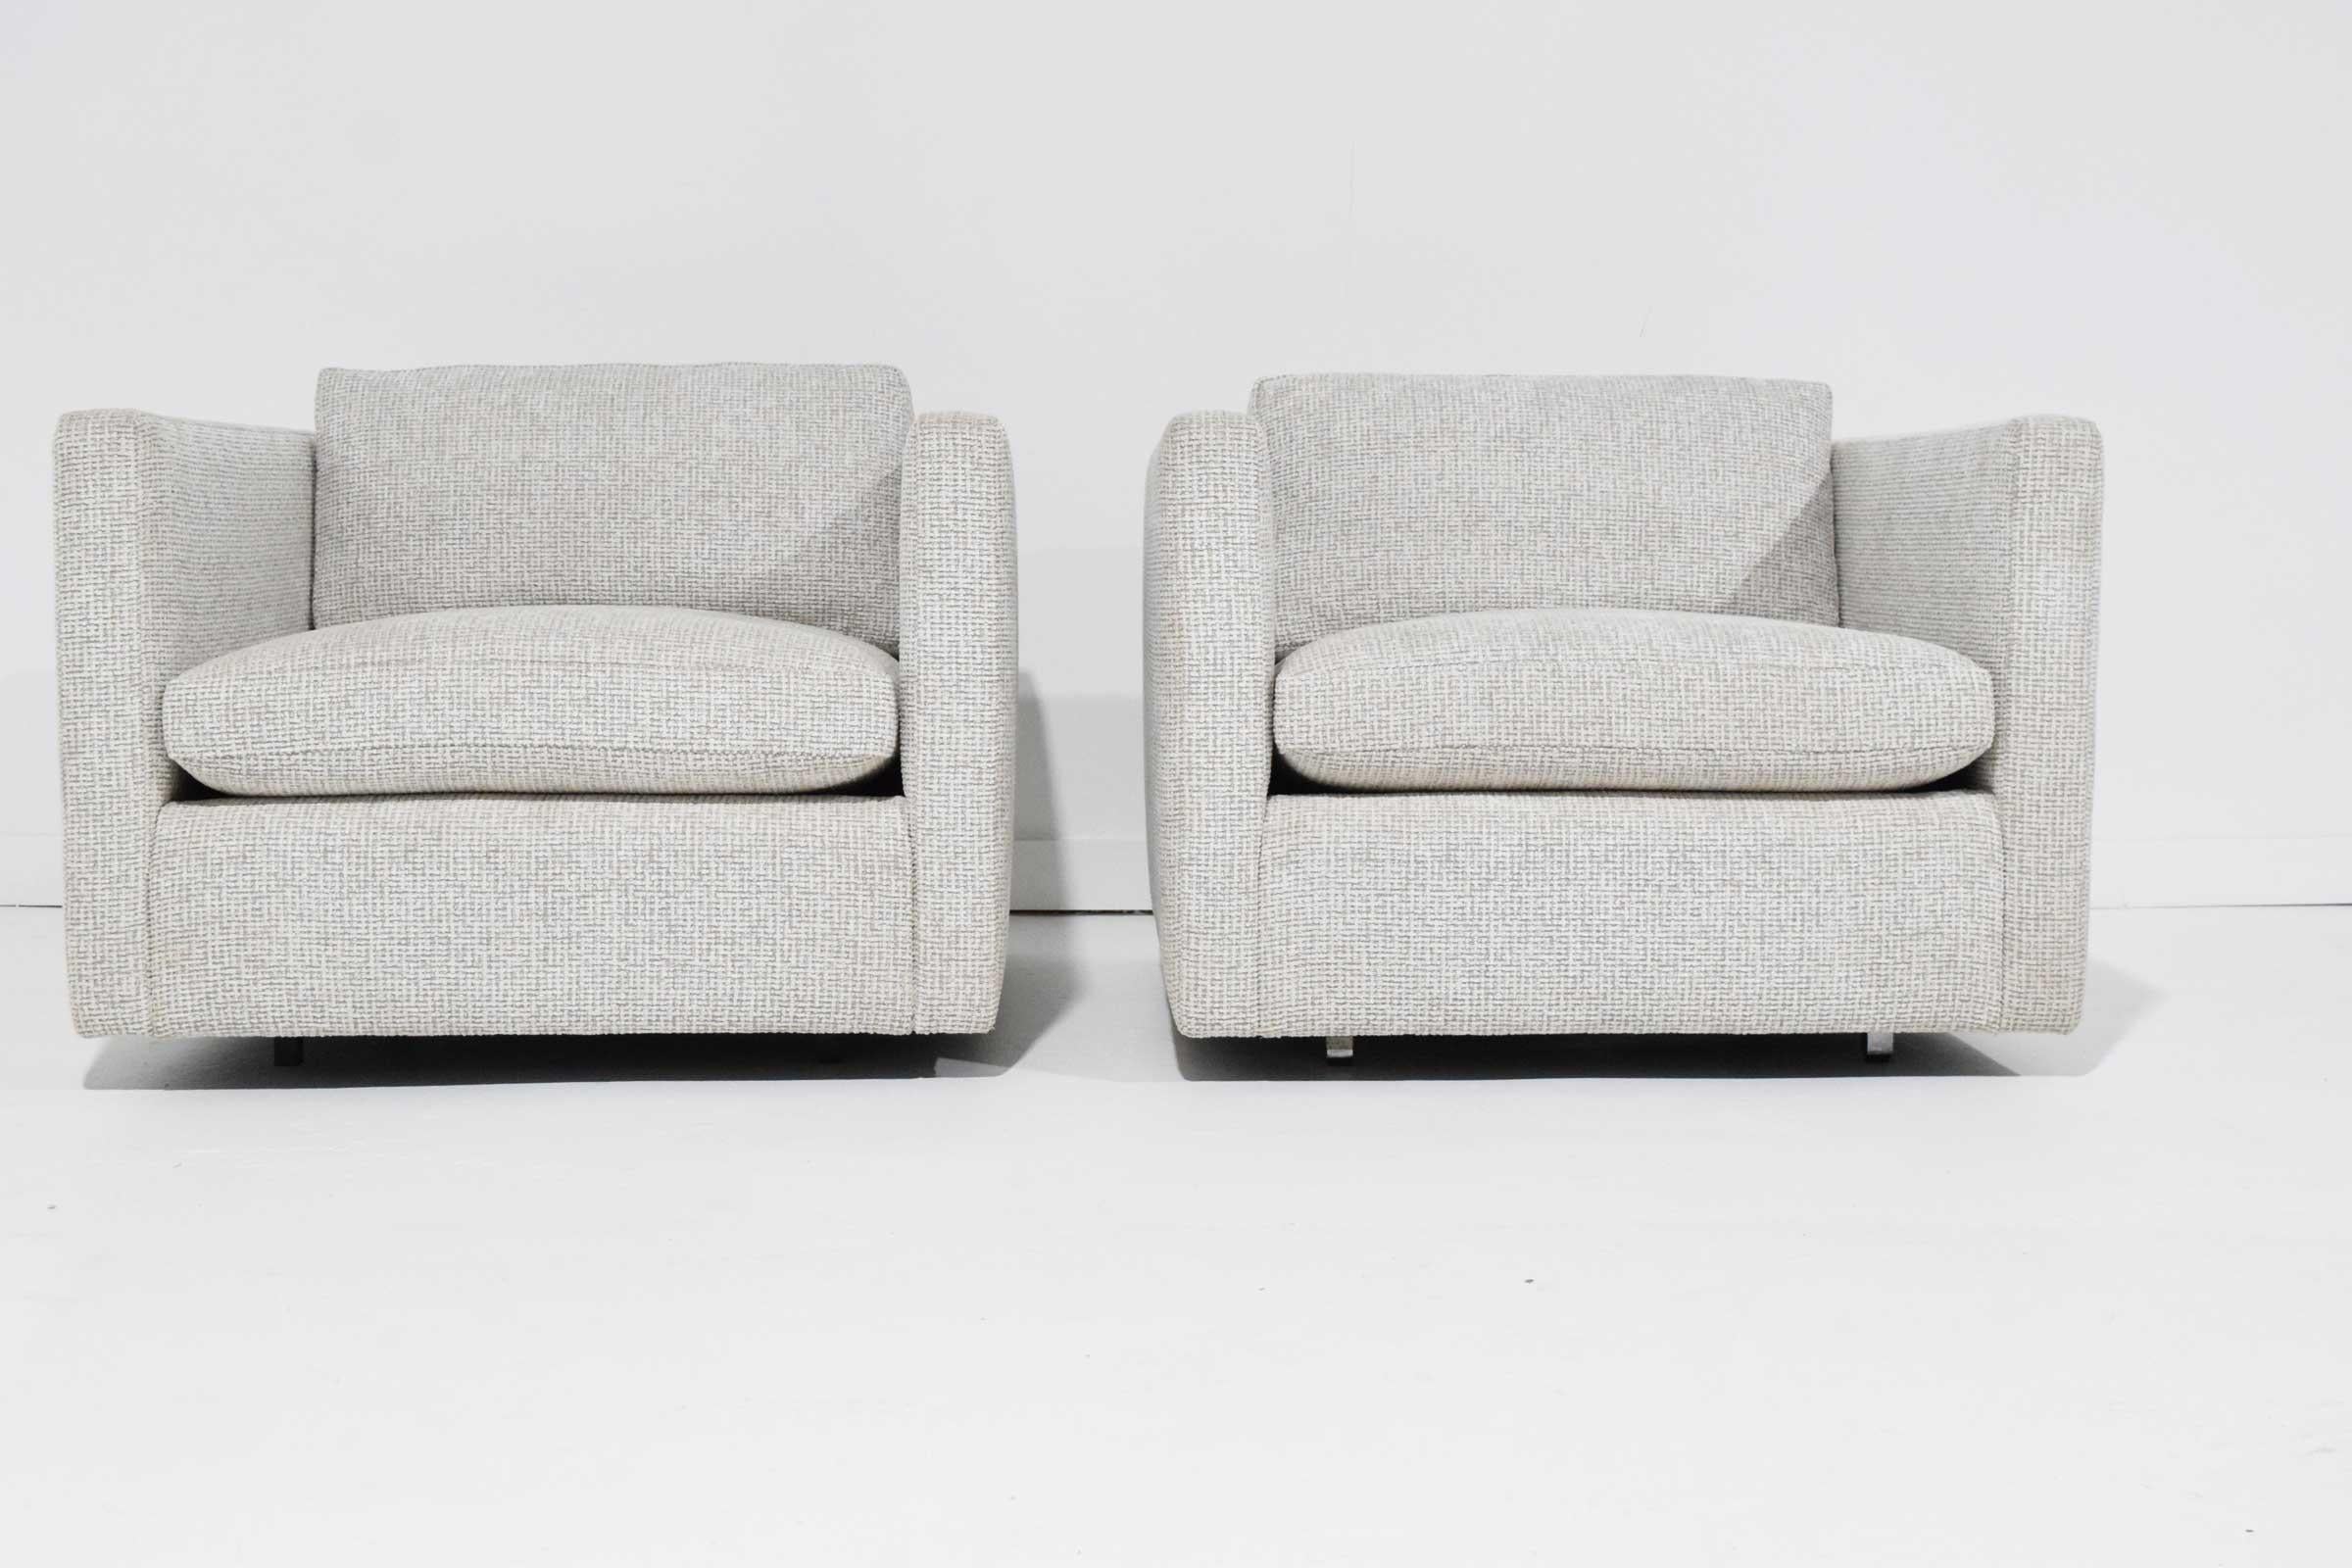 Newly upholstered in a taupe/white weave chenille, these Charles Pfister lounge chairs are a great scale, shape and comfortable.